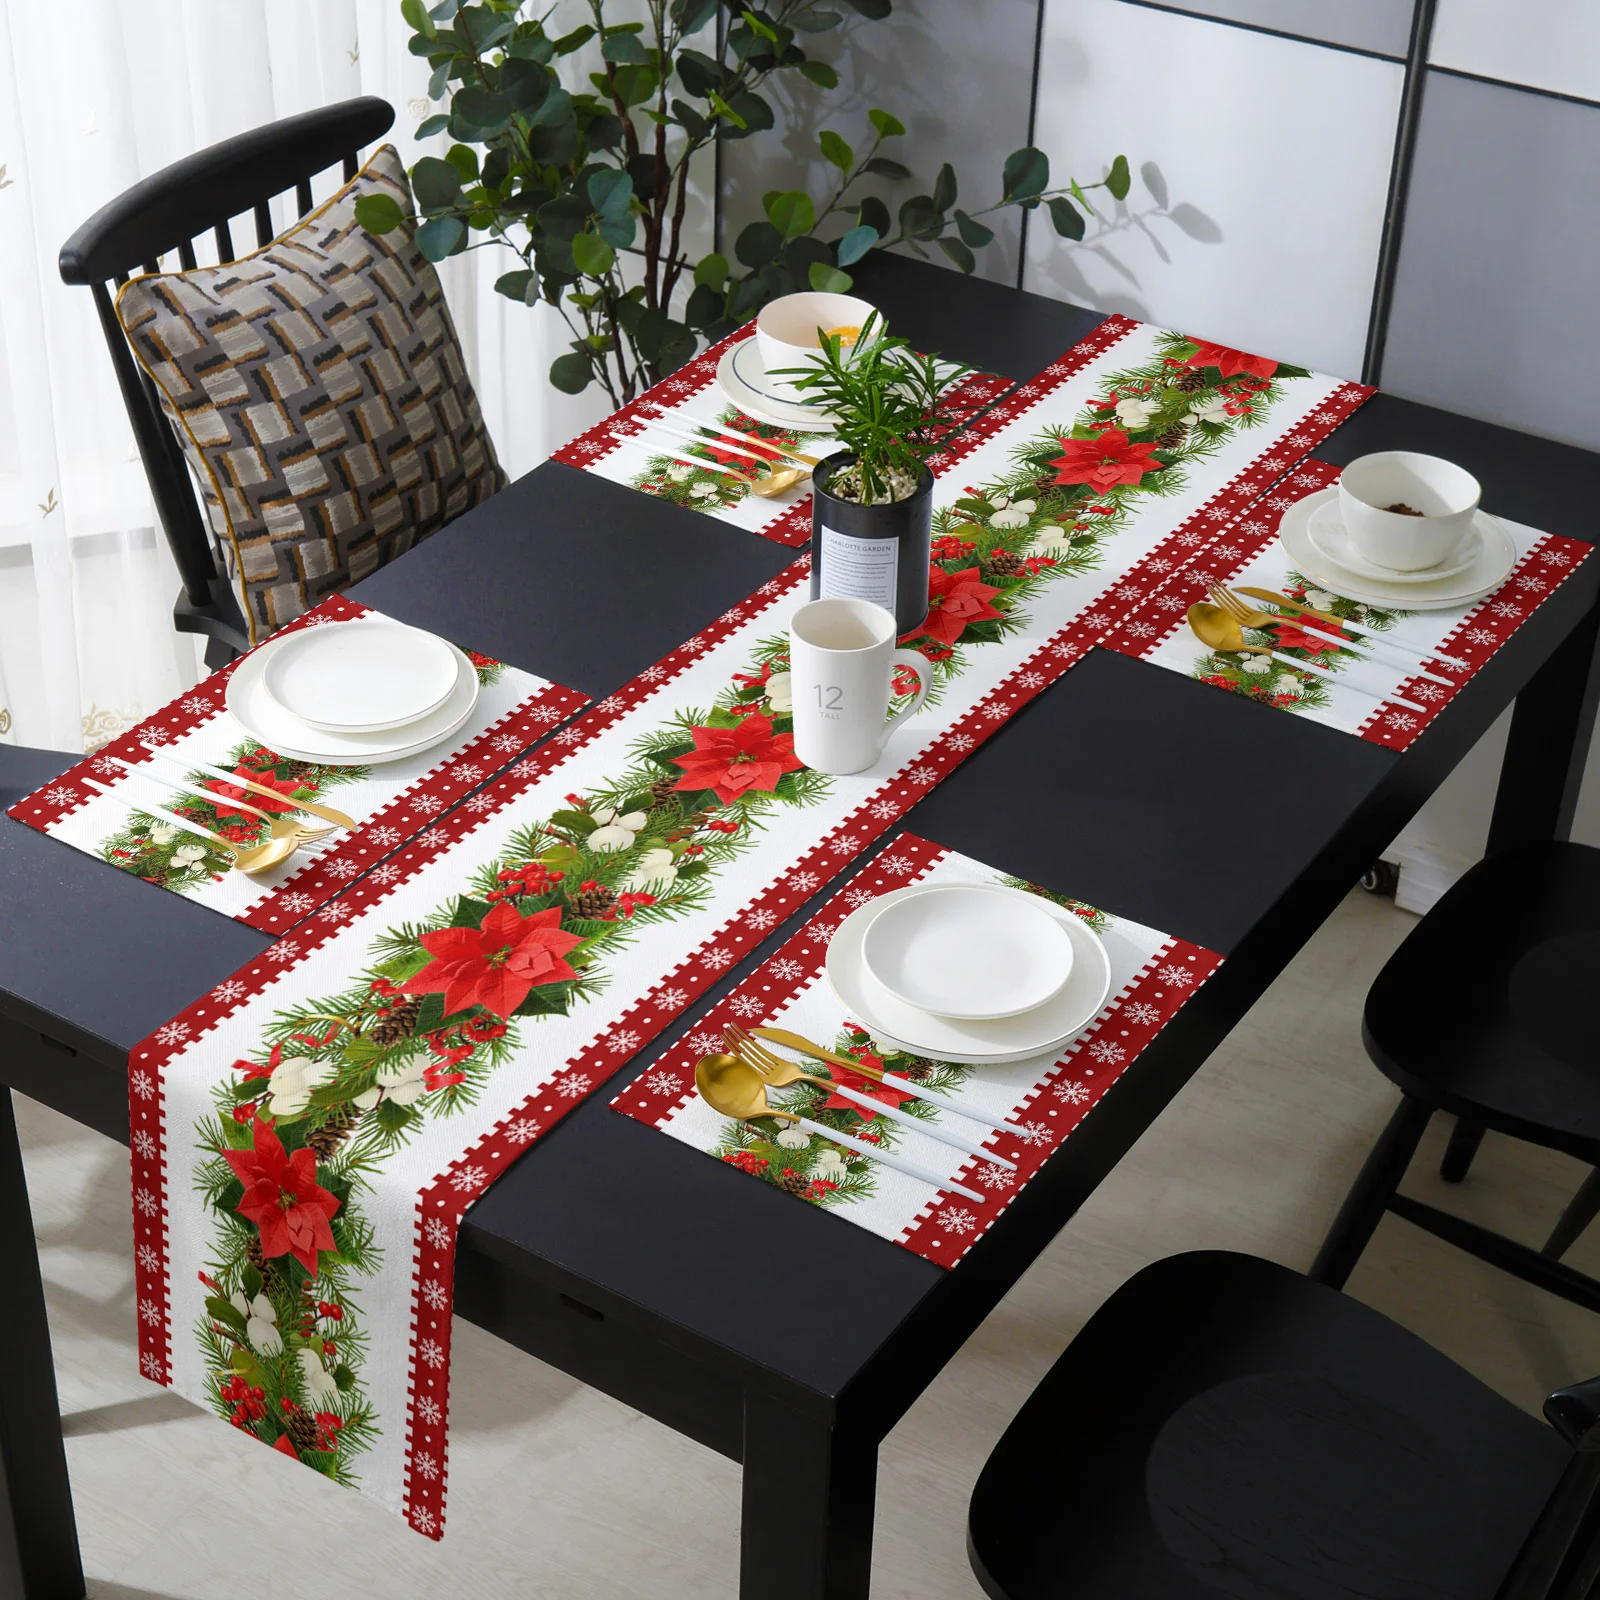 

Christmas Flower Snowflake Pine Berry Table Runner and Placemat Set Wedding Table Decor Table Runner Christmas Decor Tablecloth